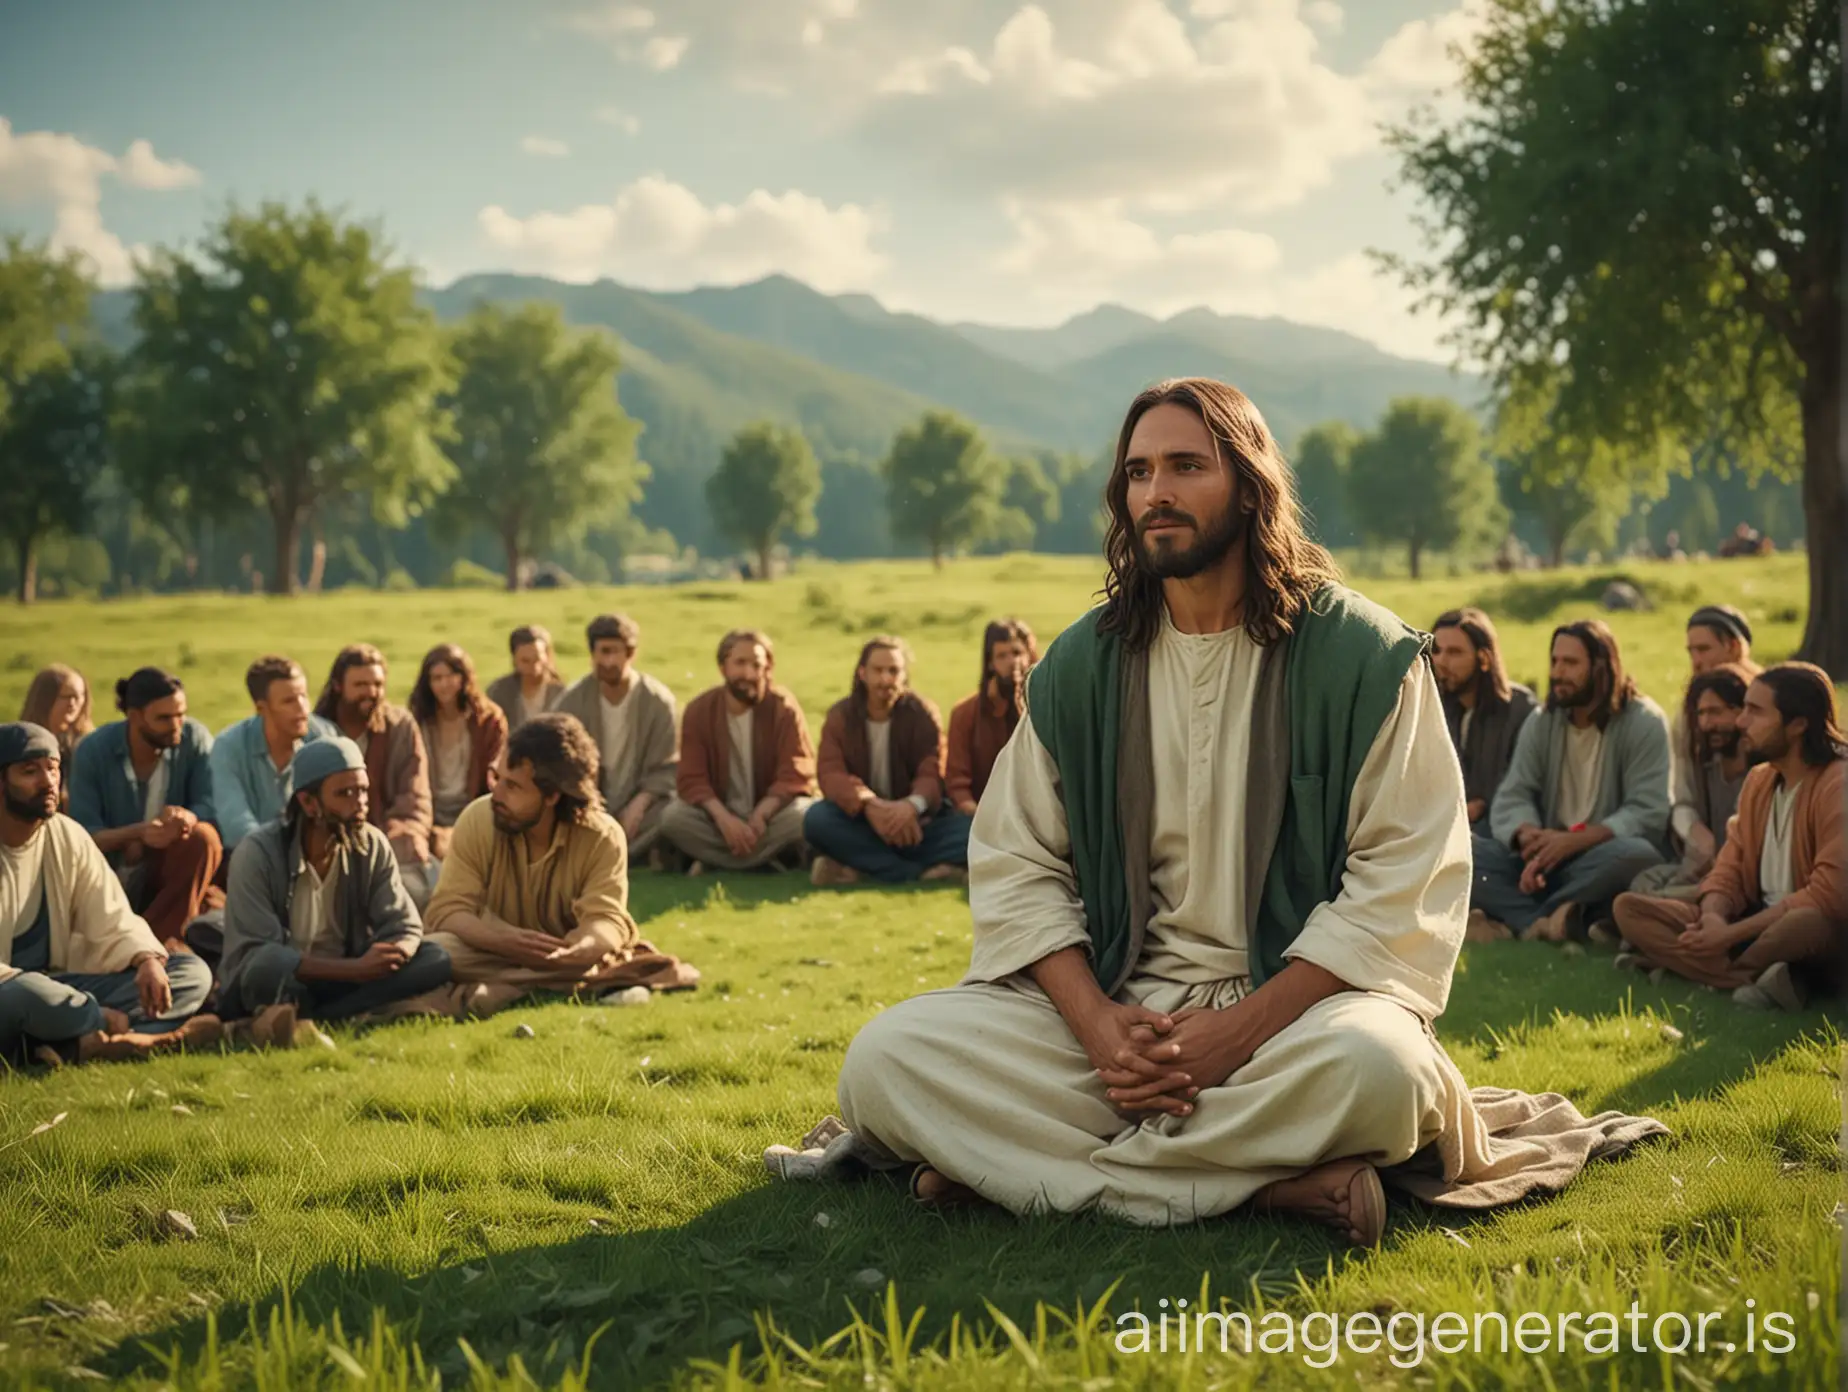 Modern-Jesus-Teaching-Outdoors-Vibrant-Panoramic-Shot-with-Casual-Crowd